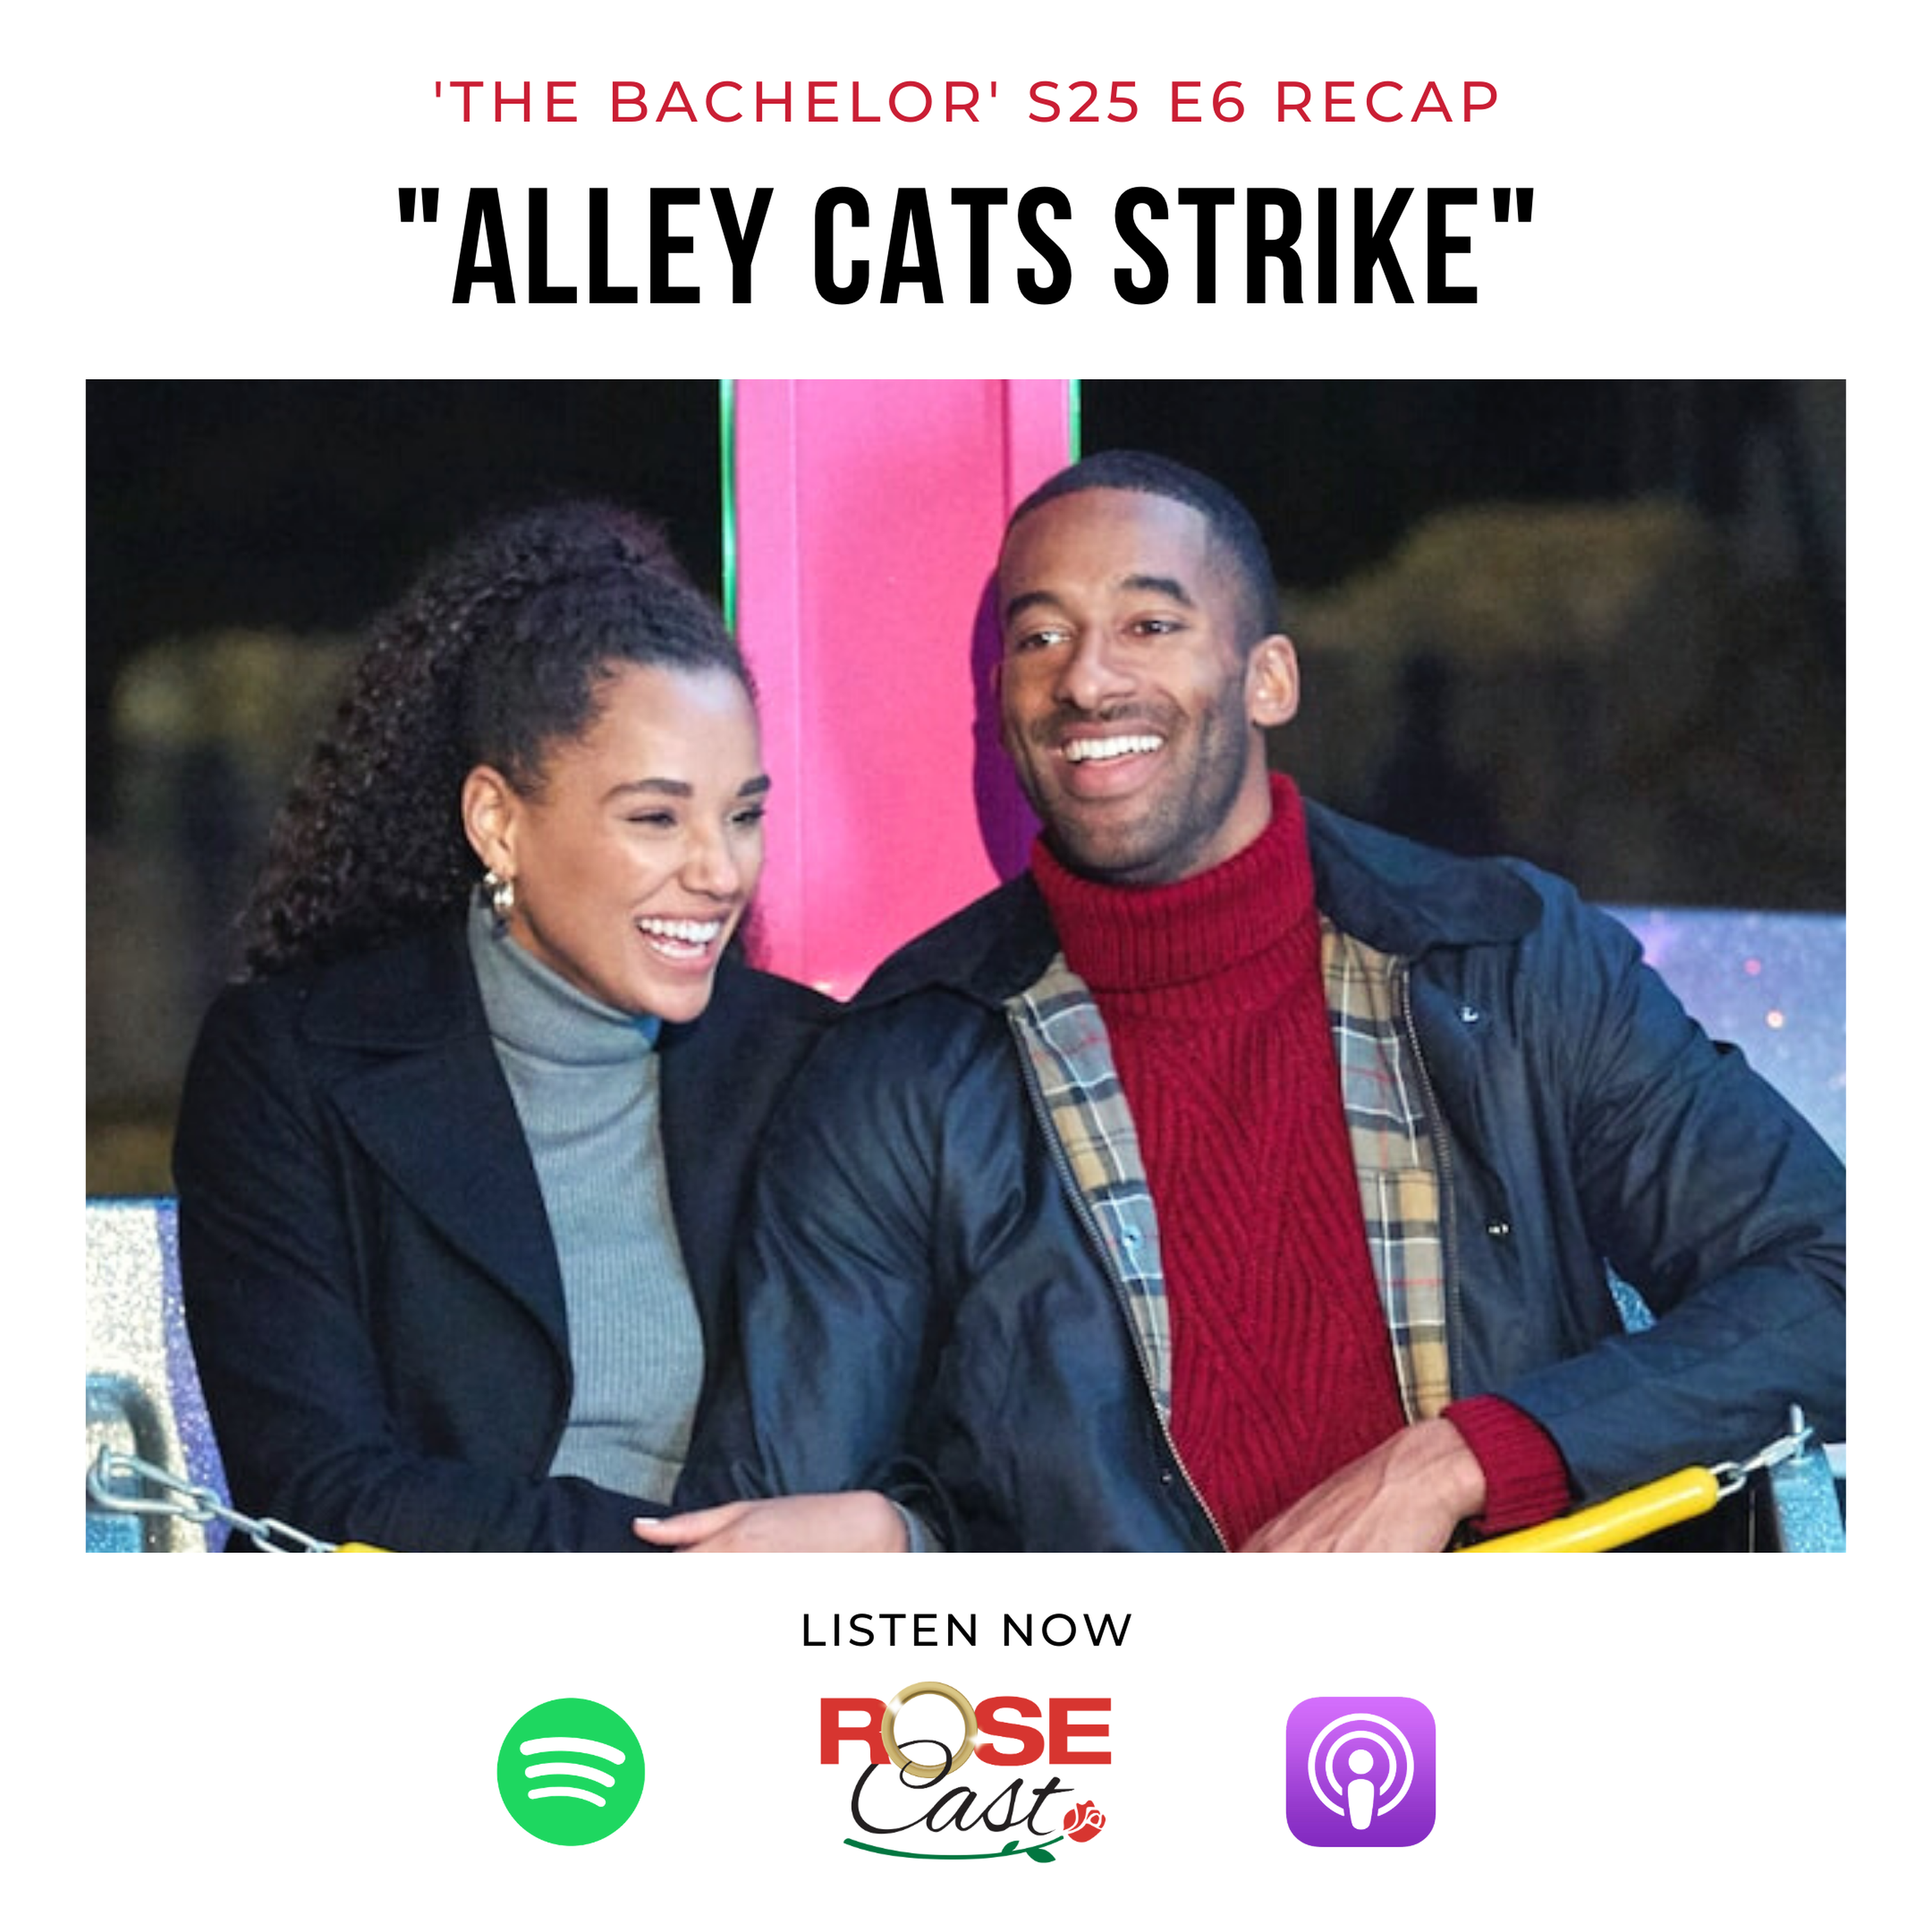 Alley Cats Strike The Bachelor S25 E6 Rosecast Bachelor Recaps With Rim And Ab On Acast